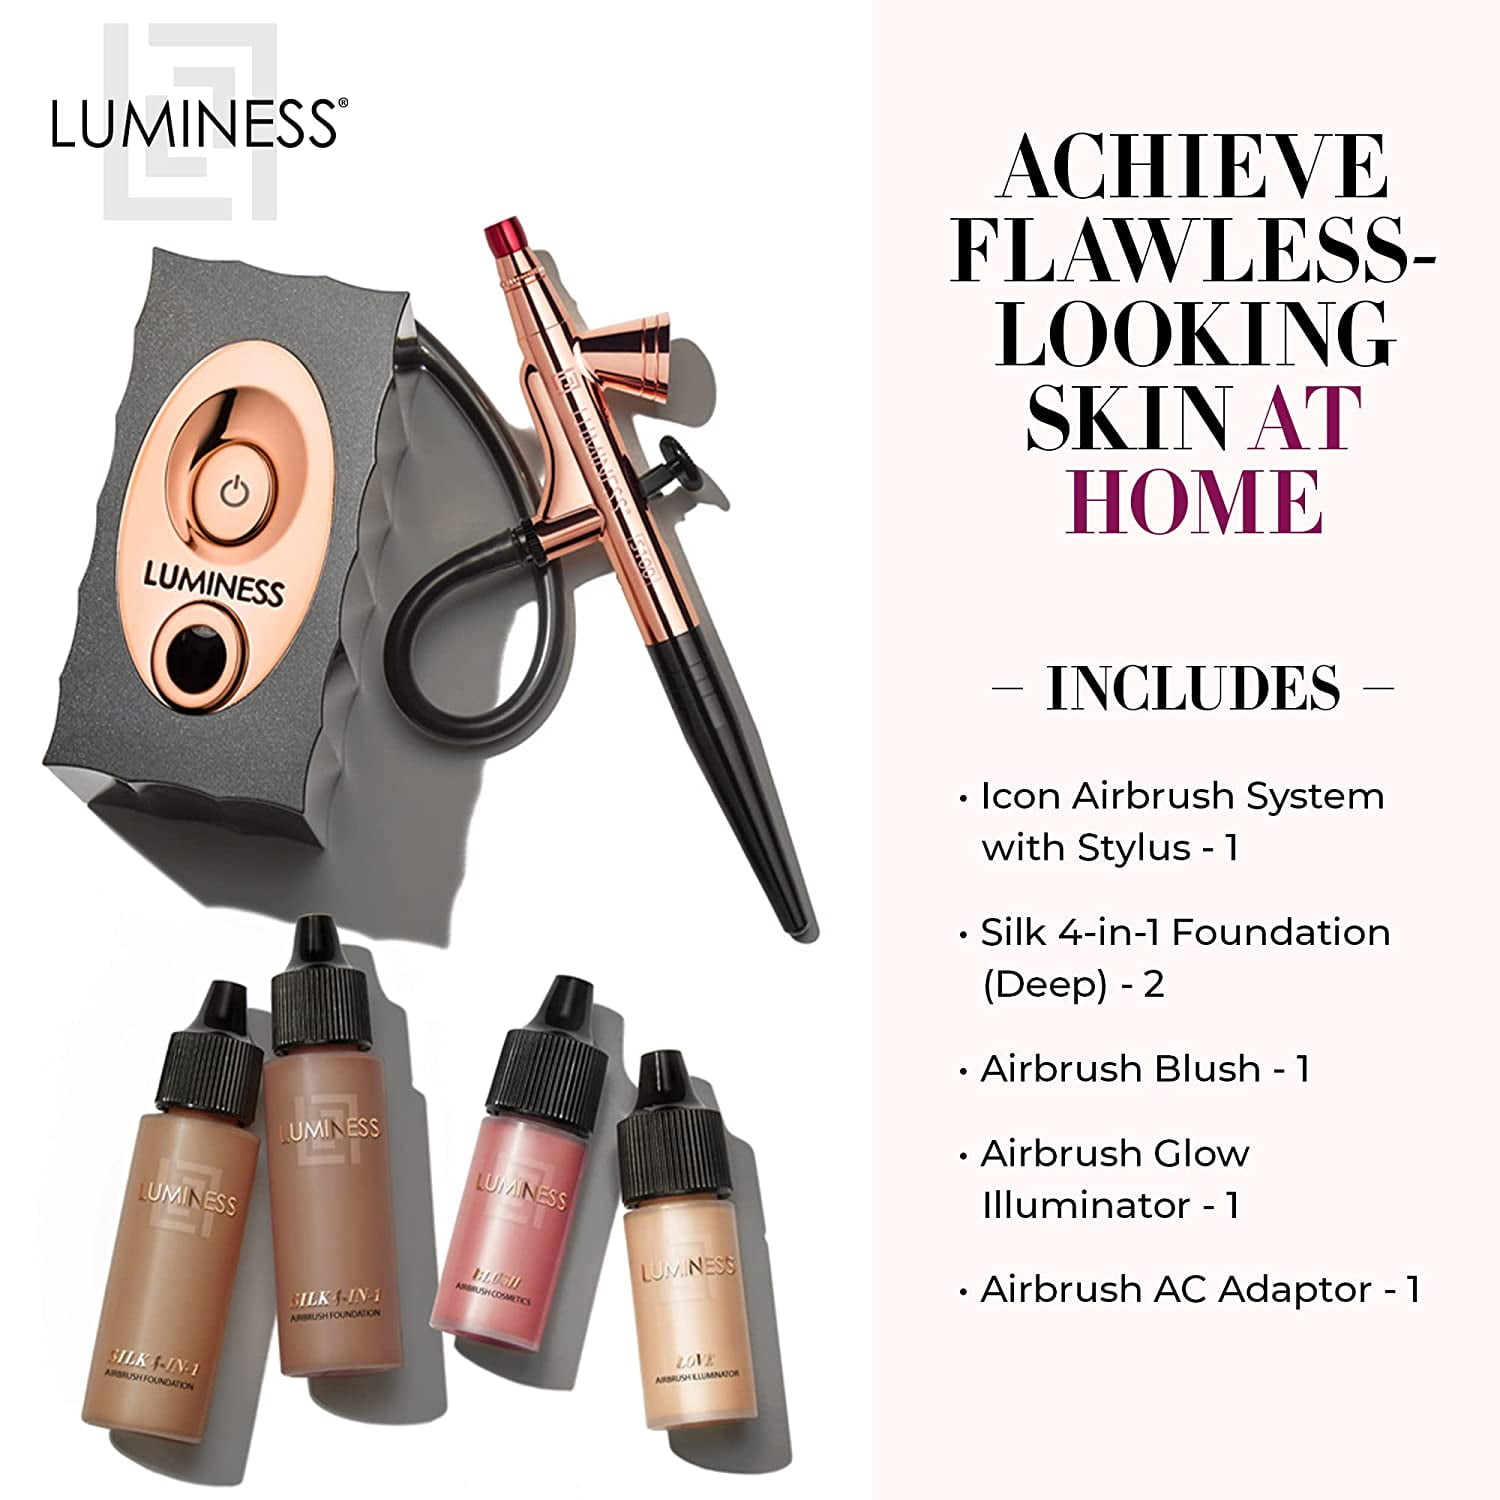 Luminess Scheduled To Debut Newest Airbrush Innovation On QVC